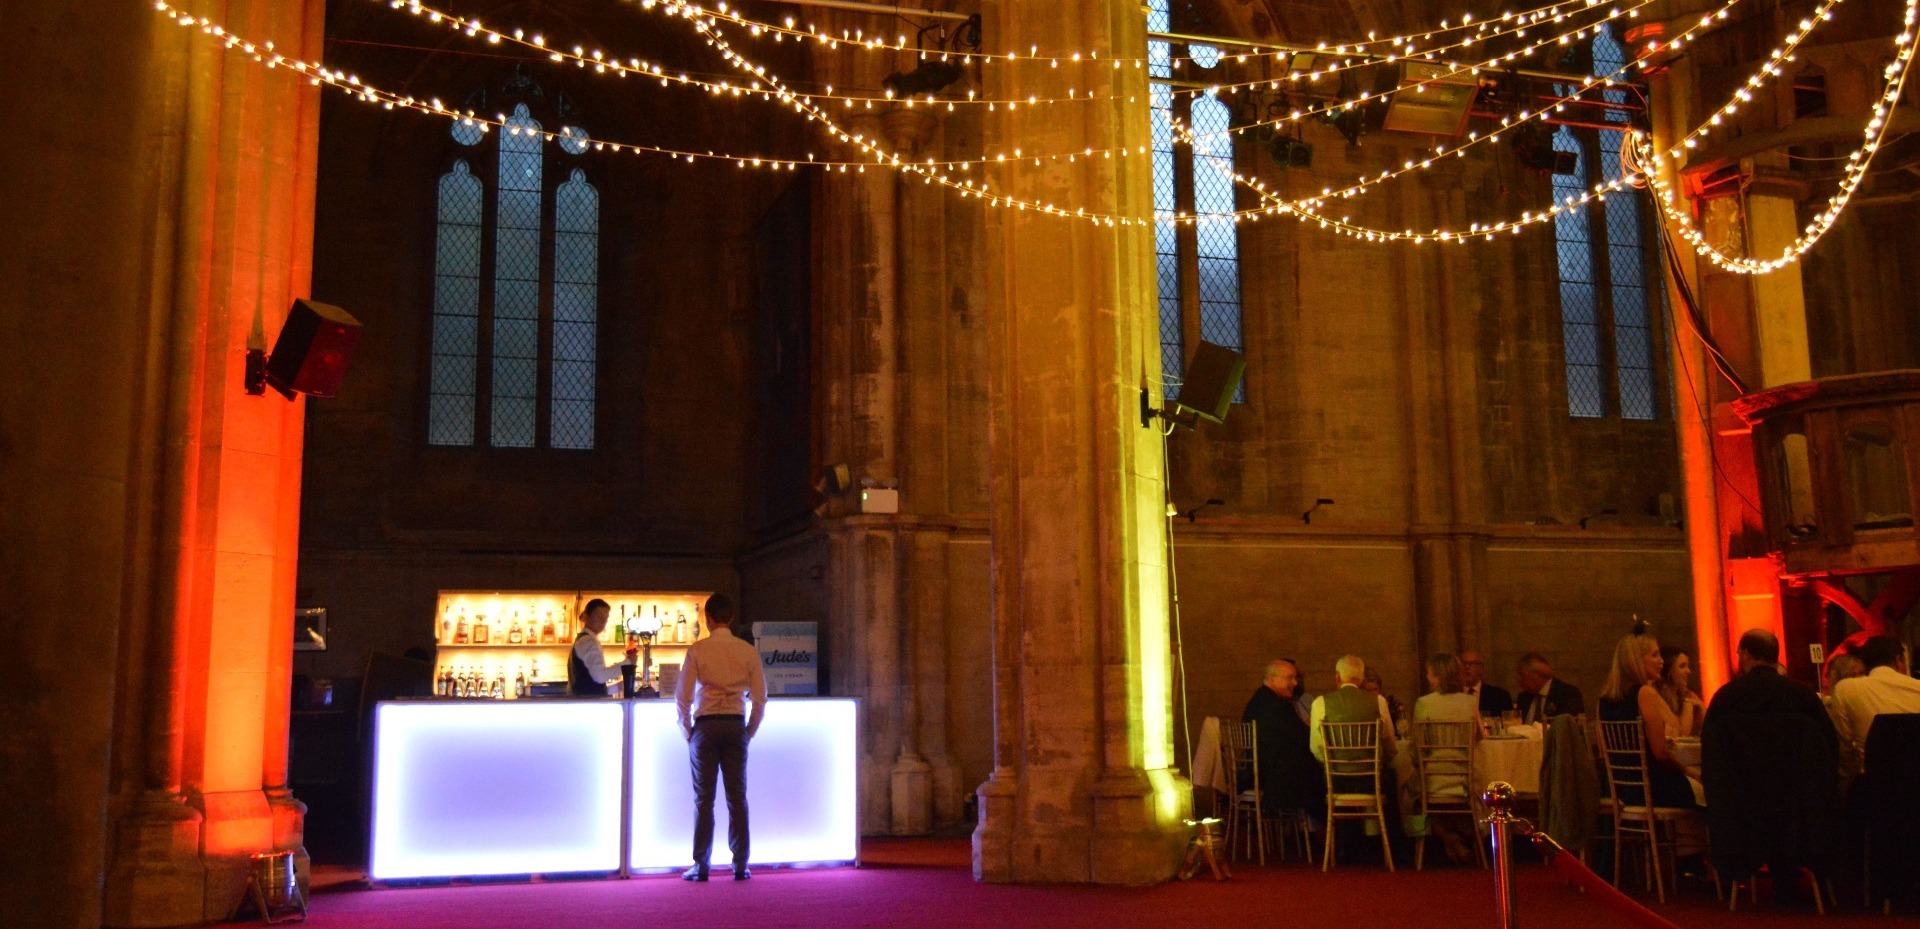 Mobile bar with LED lighting serving drinks at a wedding